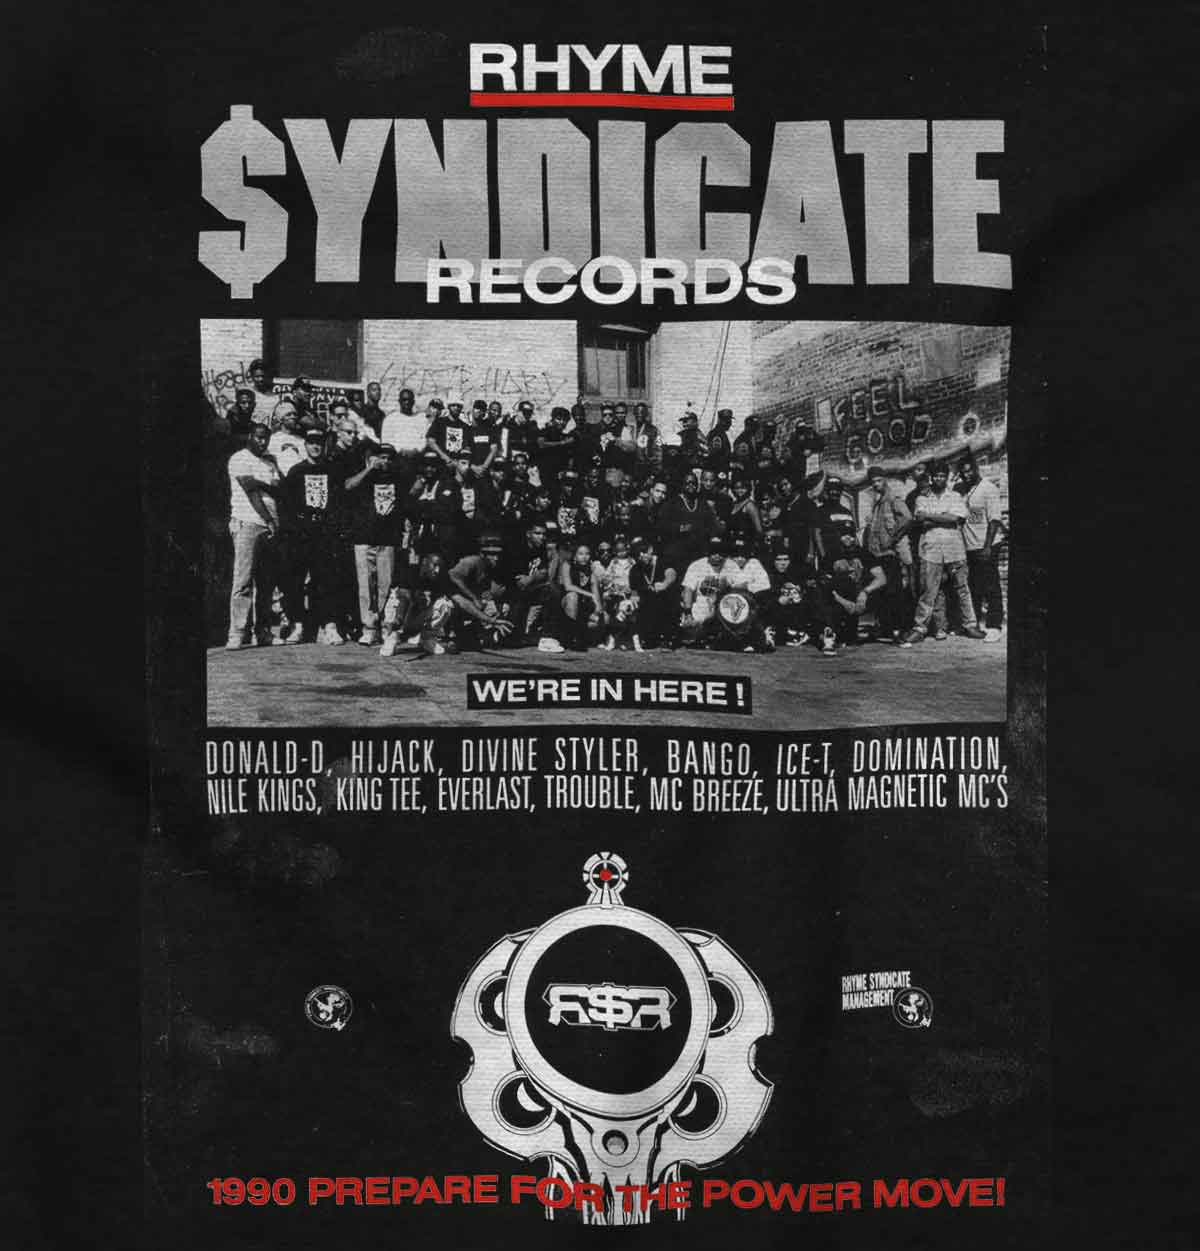 This image represents a design inspired by the 90s hip-hop era, with the logo of Rhyme Syndicate Records paying tribute to rap pioneers.